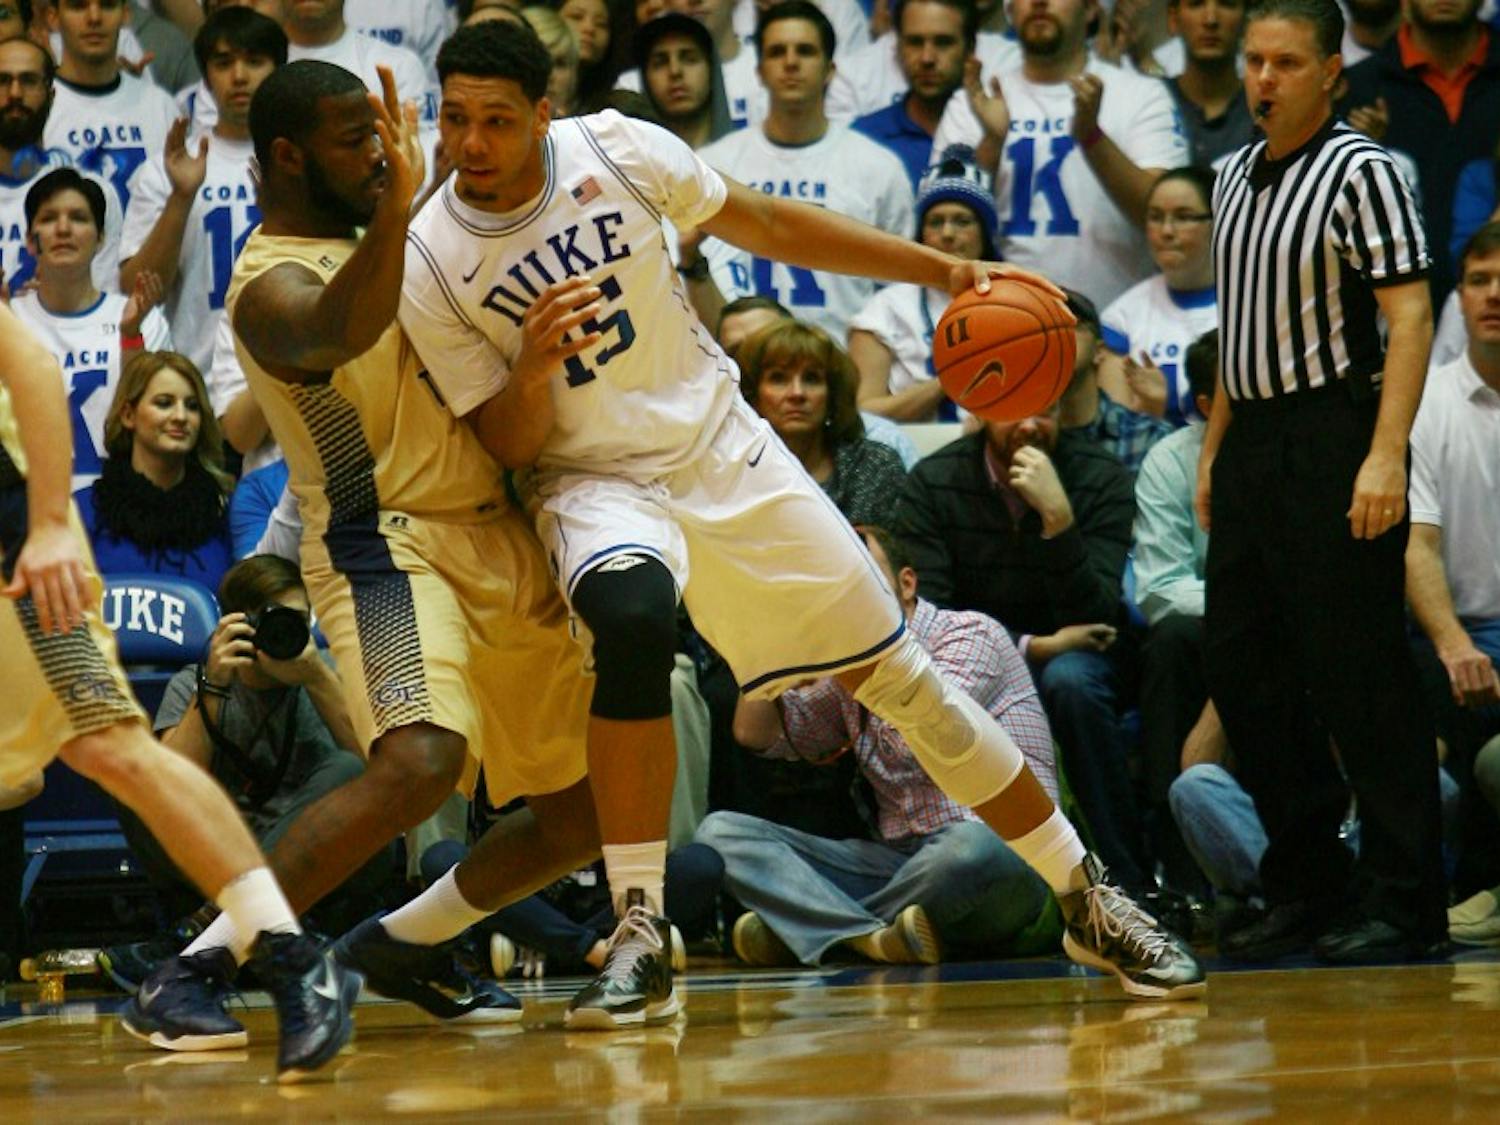 Freshman center Jahlil Okafor is averaging 18.3 points heading into his first clash with the Tar Heels.